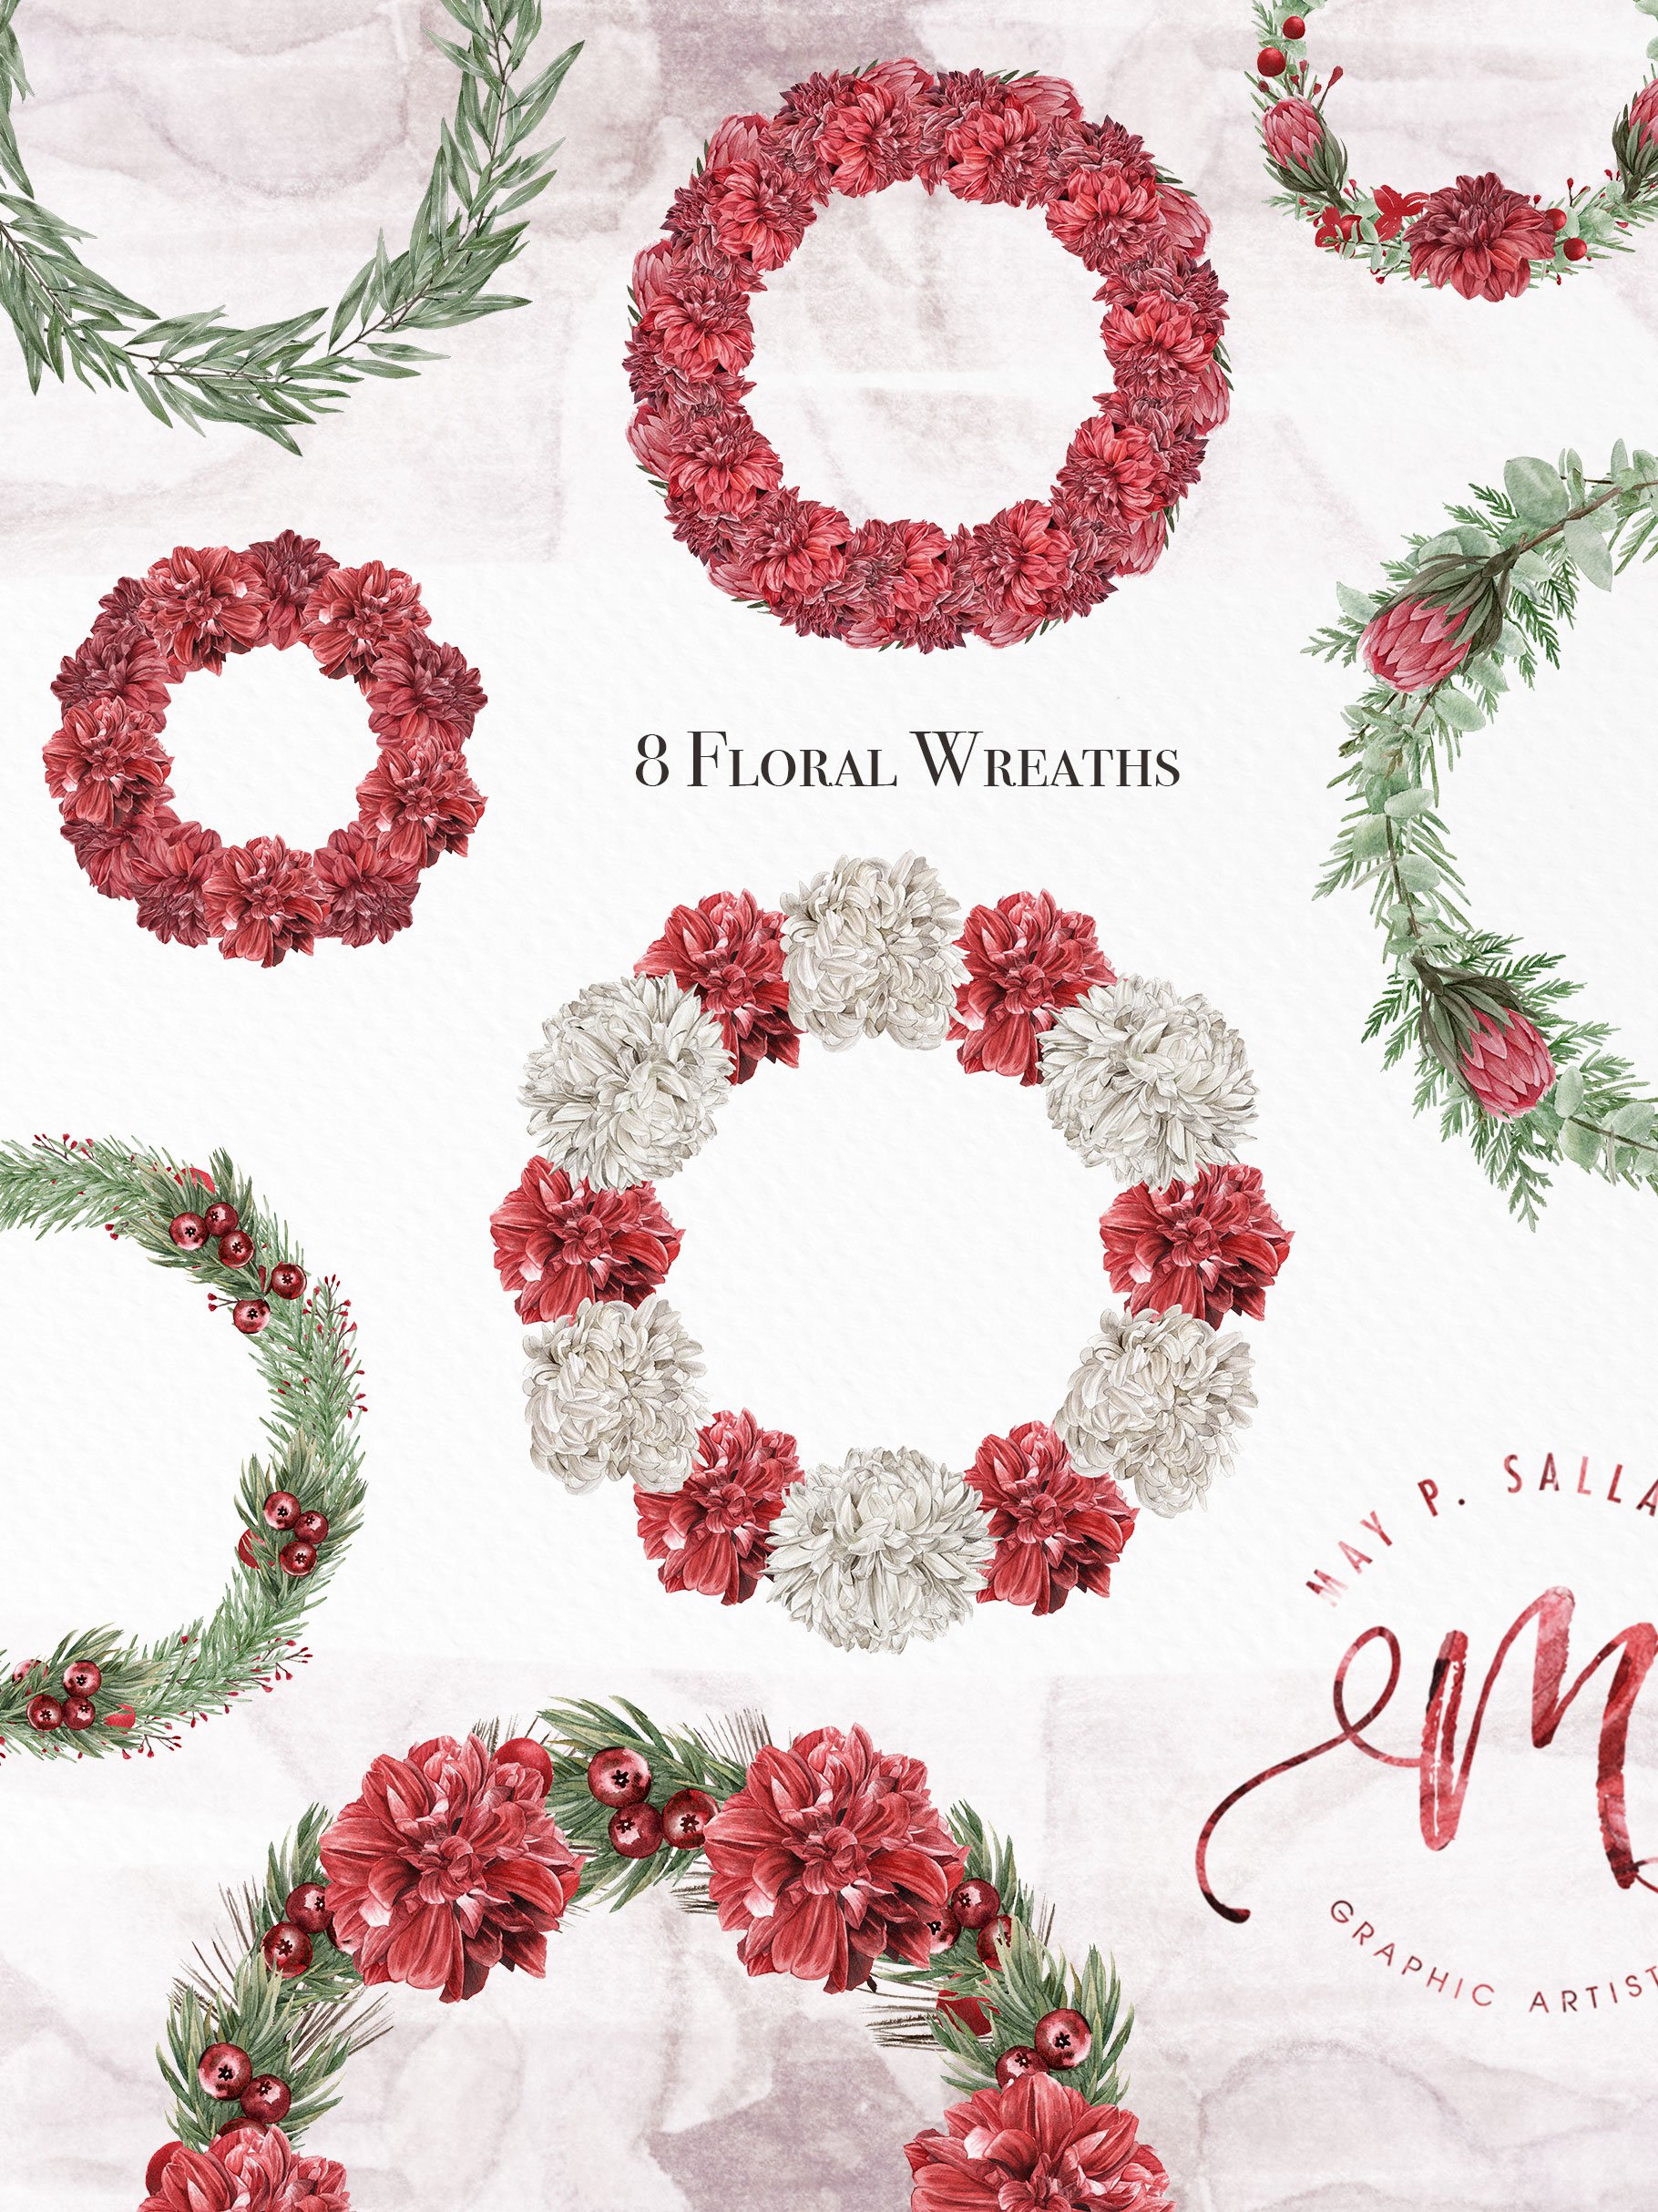 8 x Floral Wreaths for your creative project.